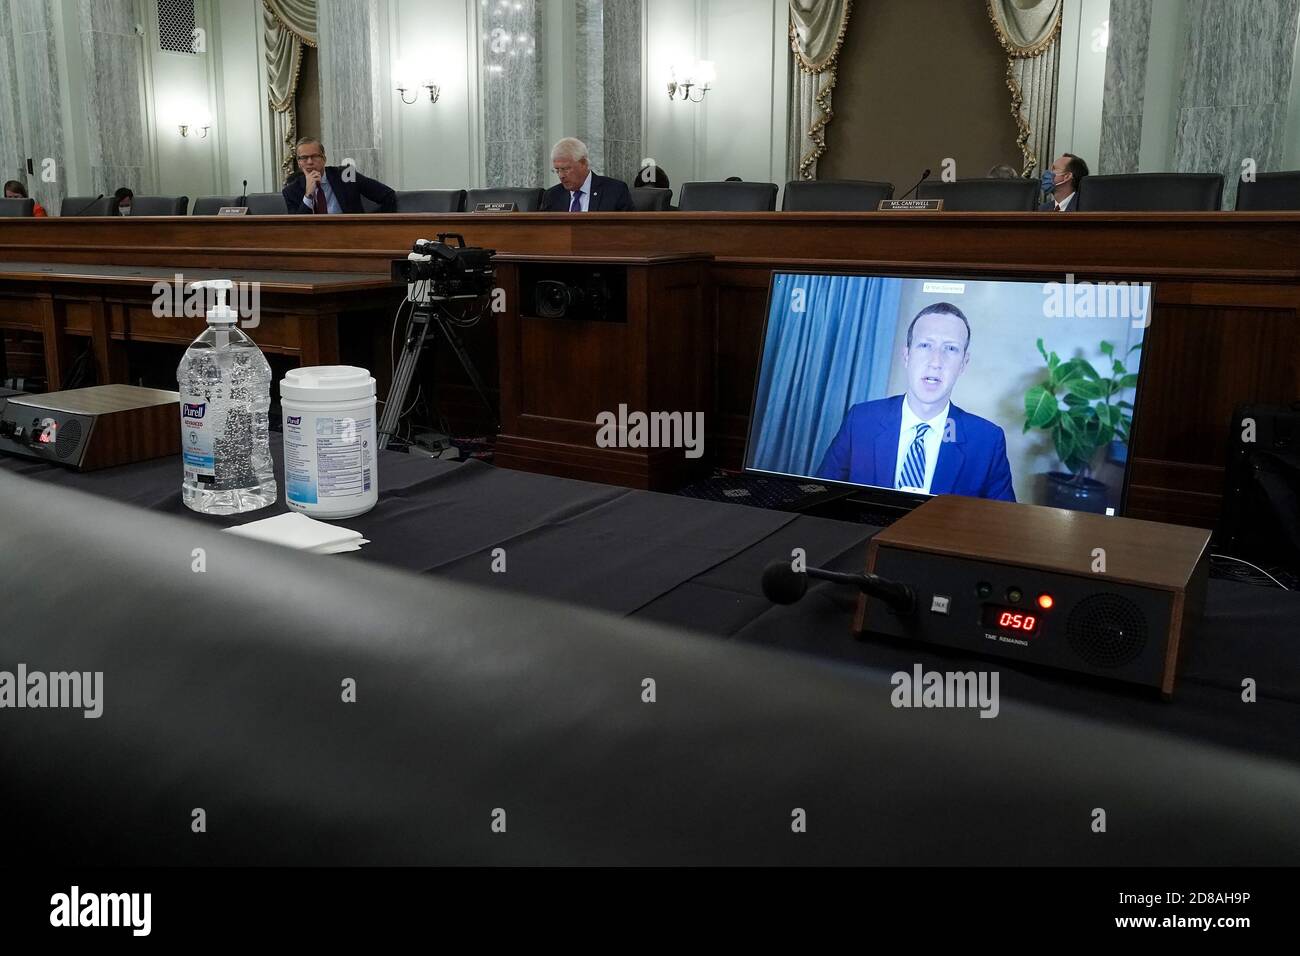 Washington, United States. 28th Oct, 2020. Facebook CEO Mark Zuckerberg testifies remotely at a hearing to discuss reforming Section 230 of the Communications Decency Act with big tech companies on Wednesday, October 28, in Washington, DC. Pool Photo by Greg Nash/UPI Credit: UPI/Alamy Live News Stock Photo